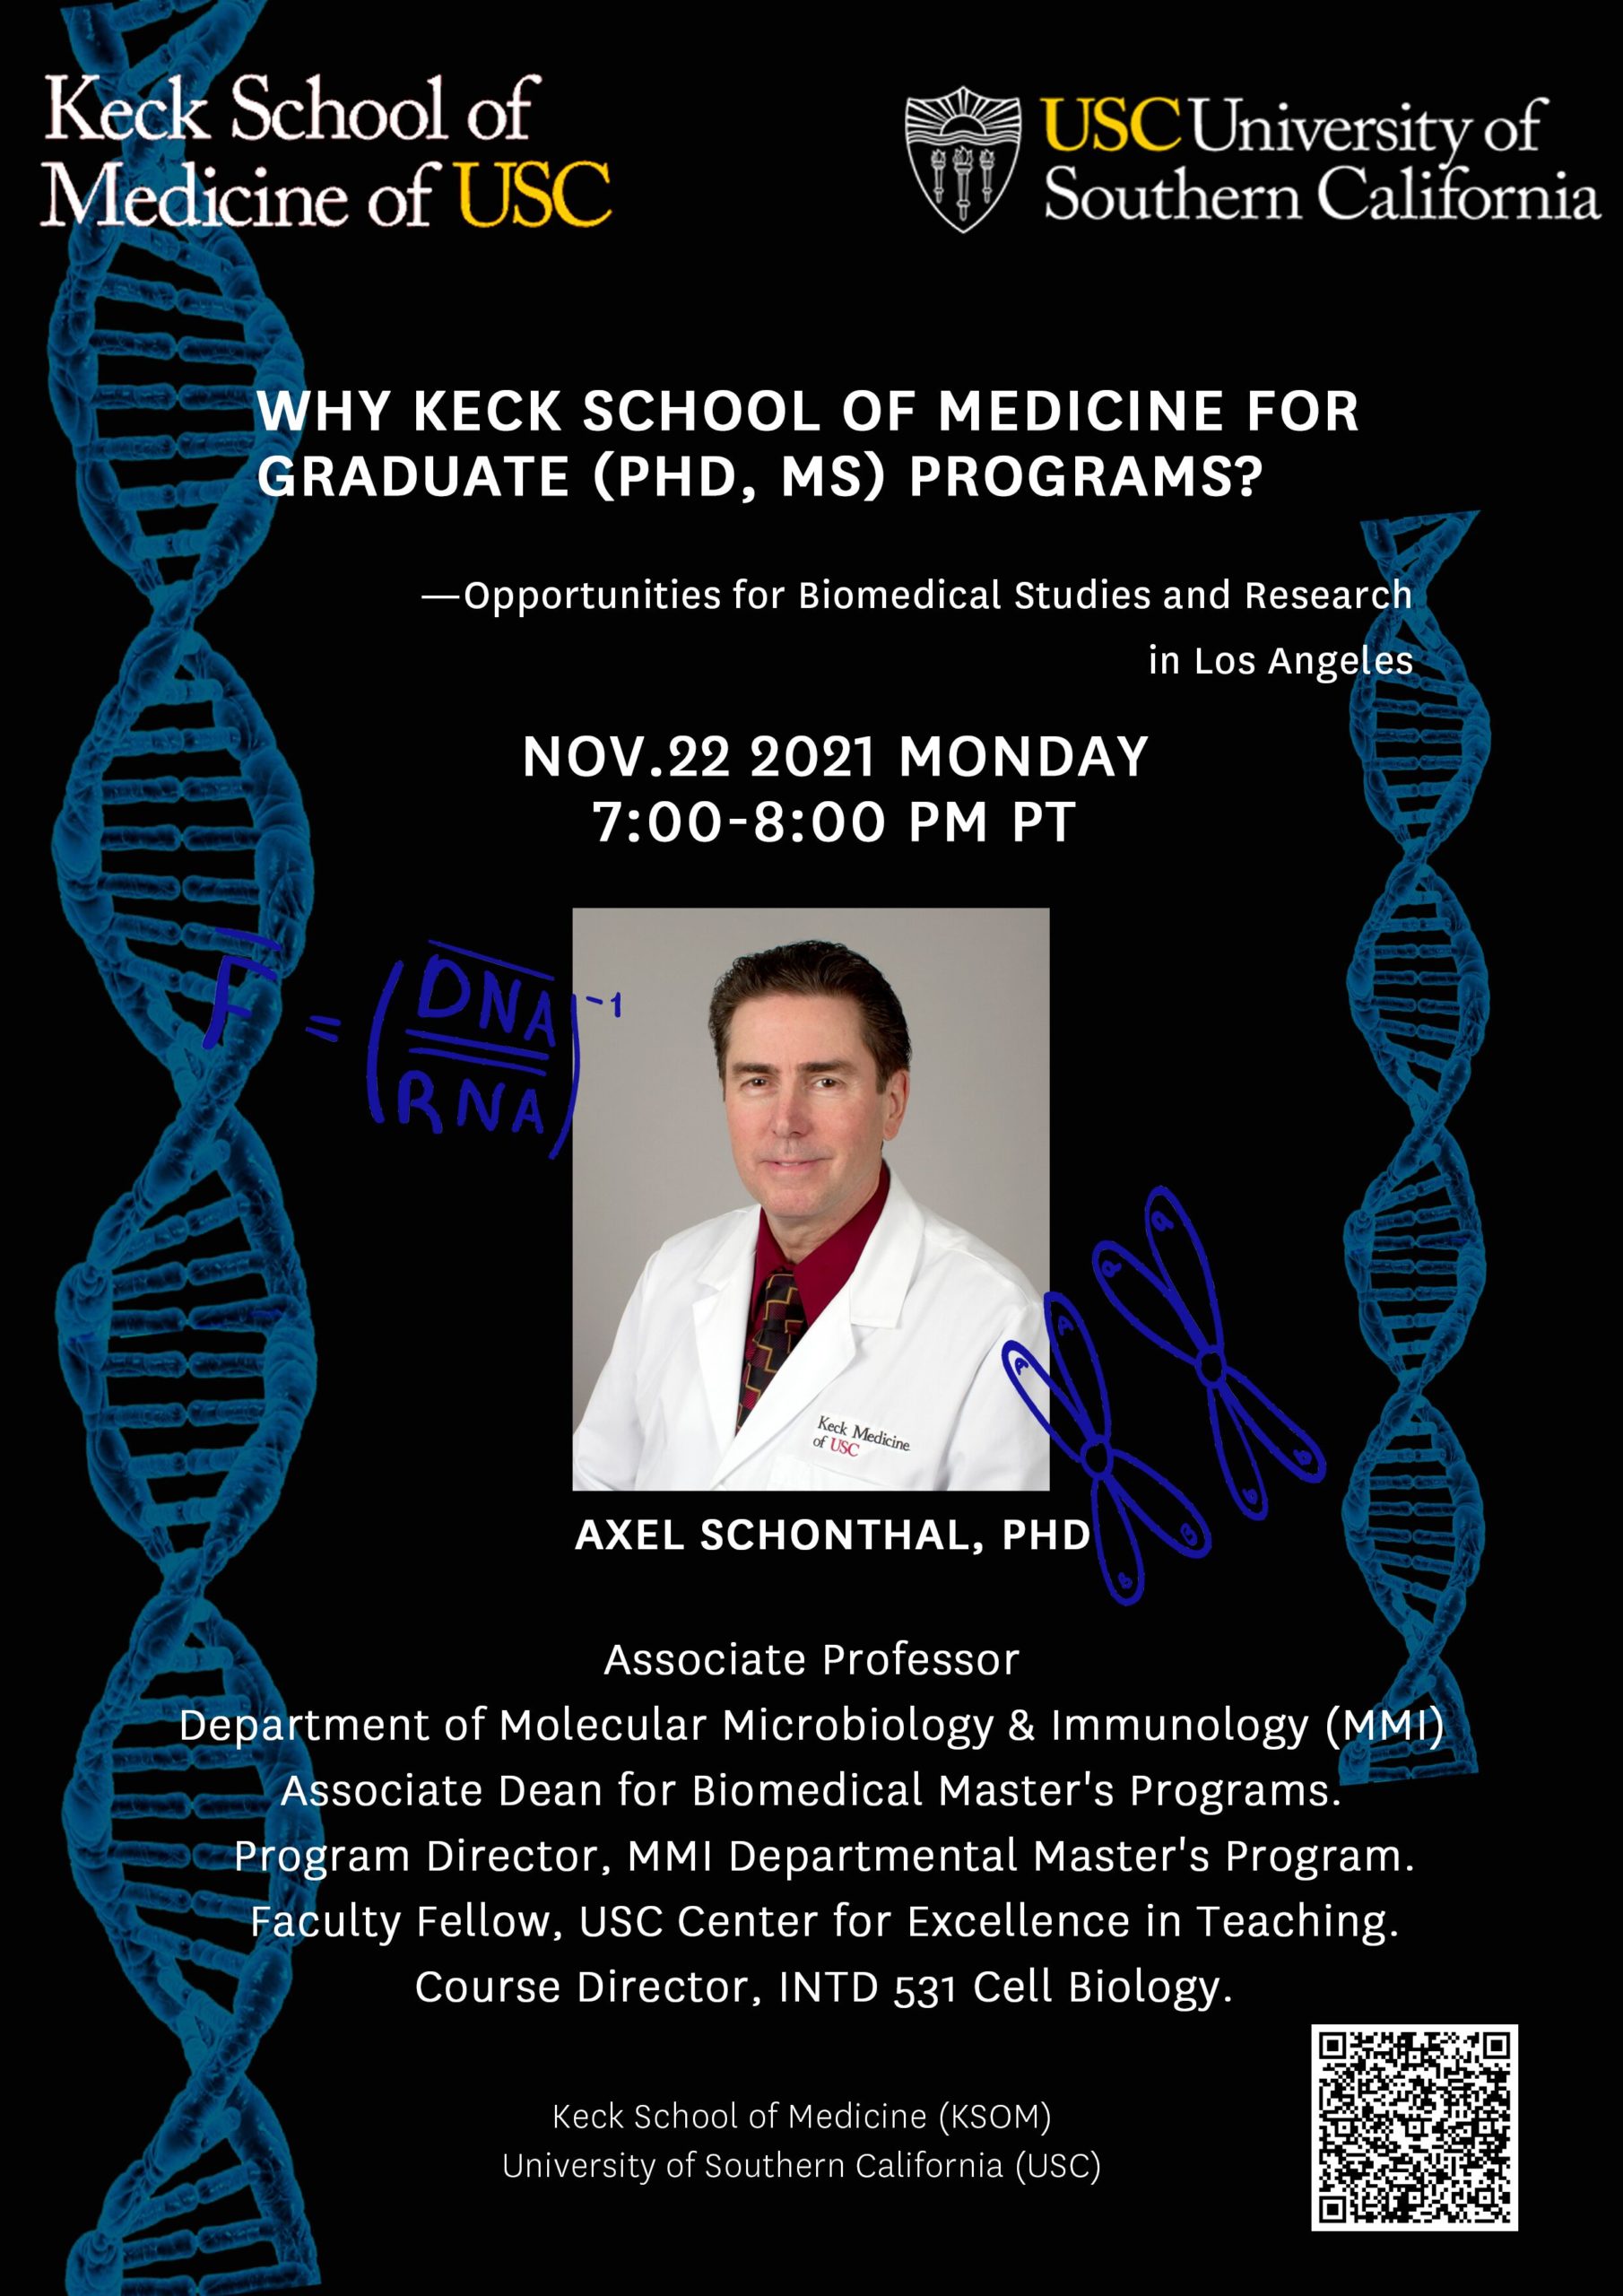 Why Keck School of Medicine for Graduate (PhD, MS) Programs? — Opportunities for Biomedical Studies and Research in Los Angeles!”